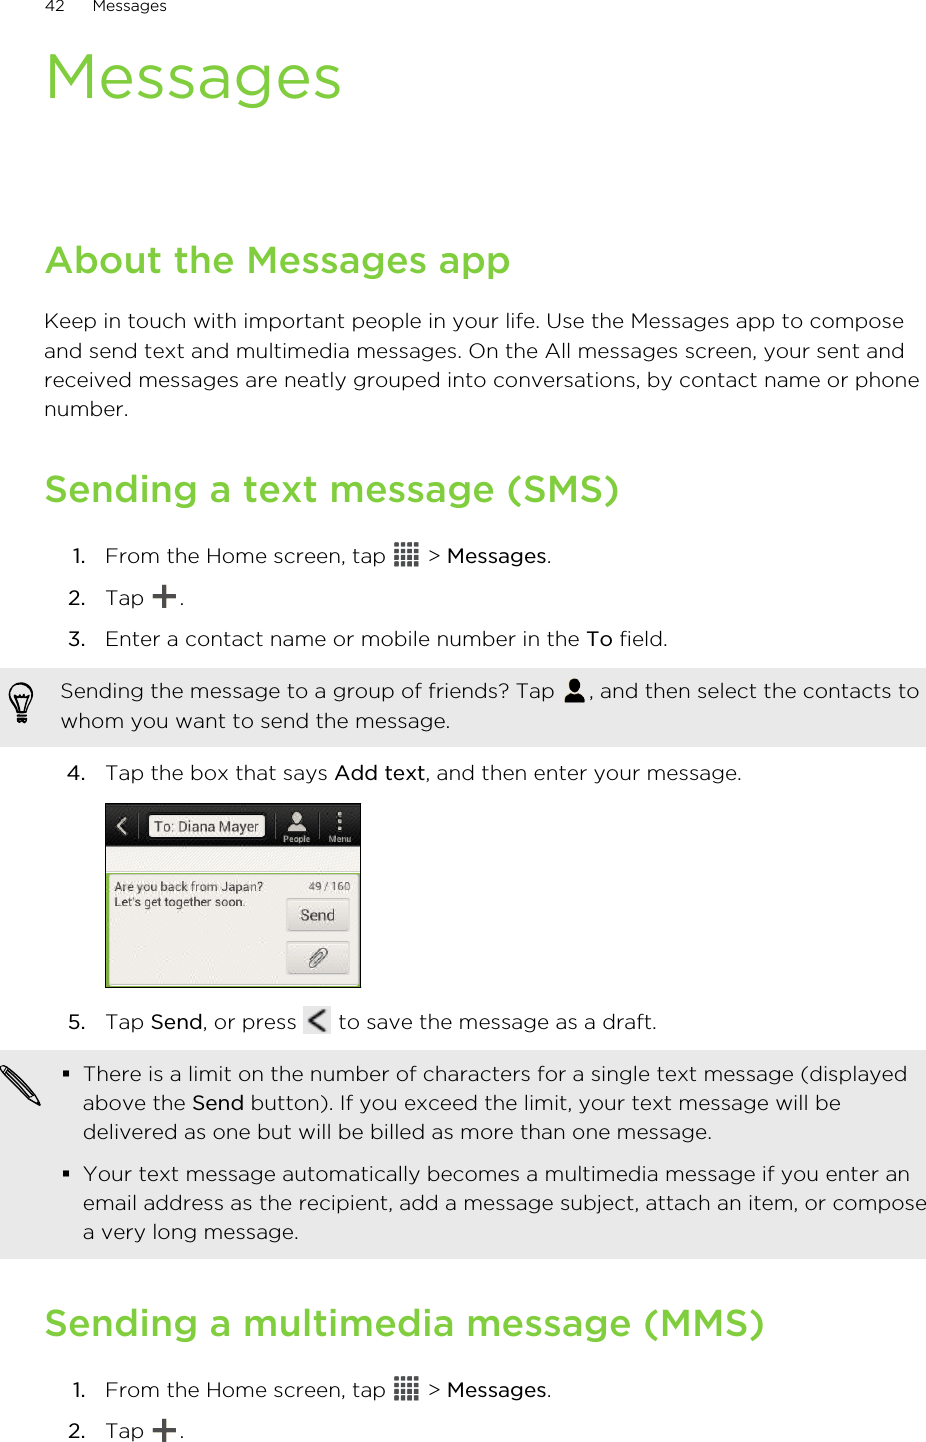 MessagesAbout the Messages appKeep in touch with important people in your life. Use the Messages app to composeand send text and multimedia messages. On the All messages screen, your sent andreceived messages are neatly grouped into conversations, by contact name or phonenumber.Sending a text message (SMS)1. From the Home screen, tap   &gt; Messages.2. Tap  .3. Enter a contact name or mobile number in the To field. Sending the message to a group of friends? Tap  , and then select the contacts towhom you want to send the message.4. Tap the box that says Add text, and then enter your message. 5. Tap Send, or press   to save the message as a draft. §There is a limit on the number of characters for a single text message (displayedabove the Send button). If you exceed the limit, your text message will bedelivered as one but will be billed as more than one message.§Your text message automatically becomes a multimedia message if you enter anemail address as the recipient, add a message subject, attach an item, or composea very long message.Sending a multimedia message (MMS)1. From the Home screen, tap   &gt; Messages.2. Tap  .42 Messages